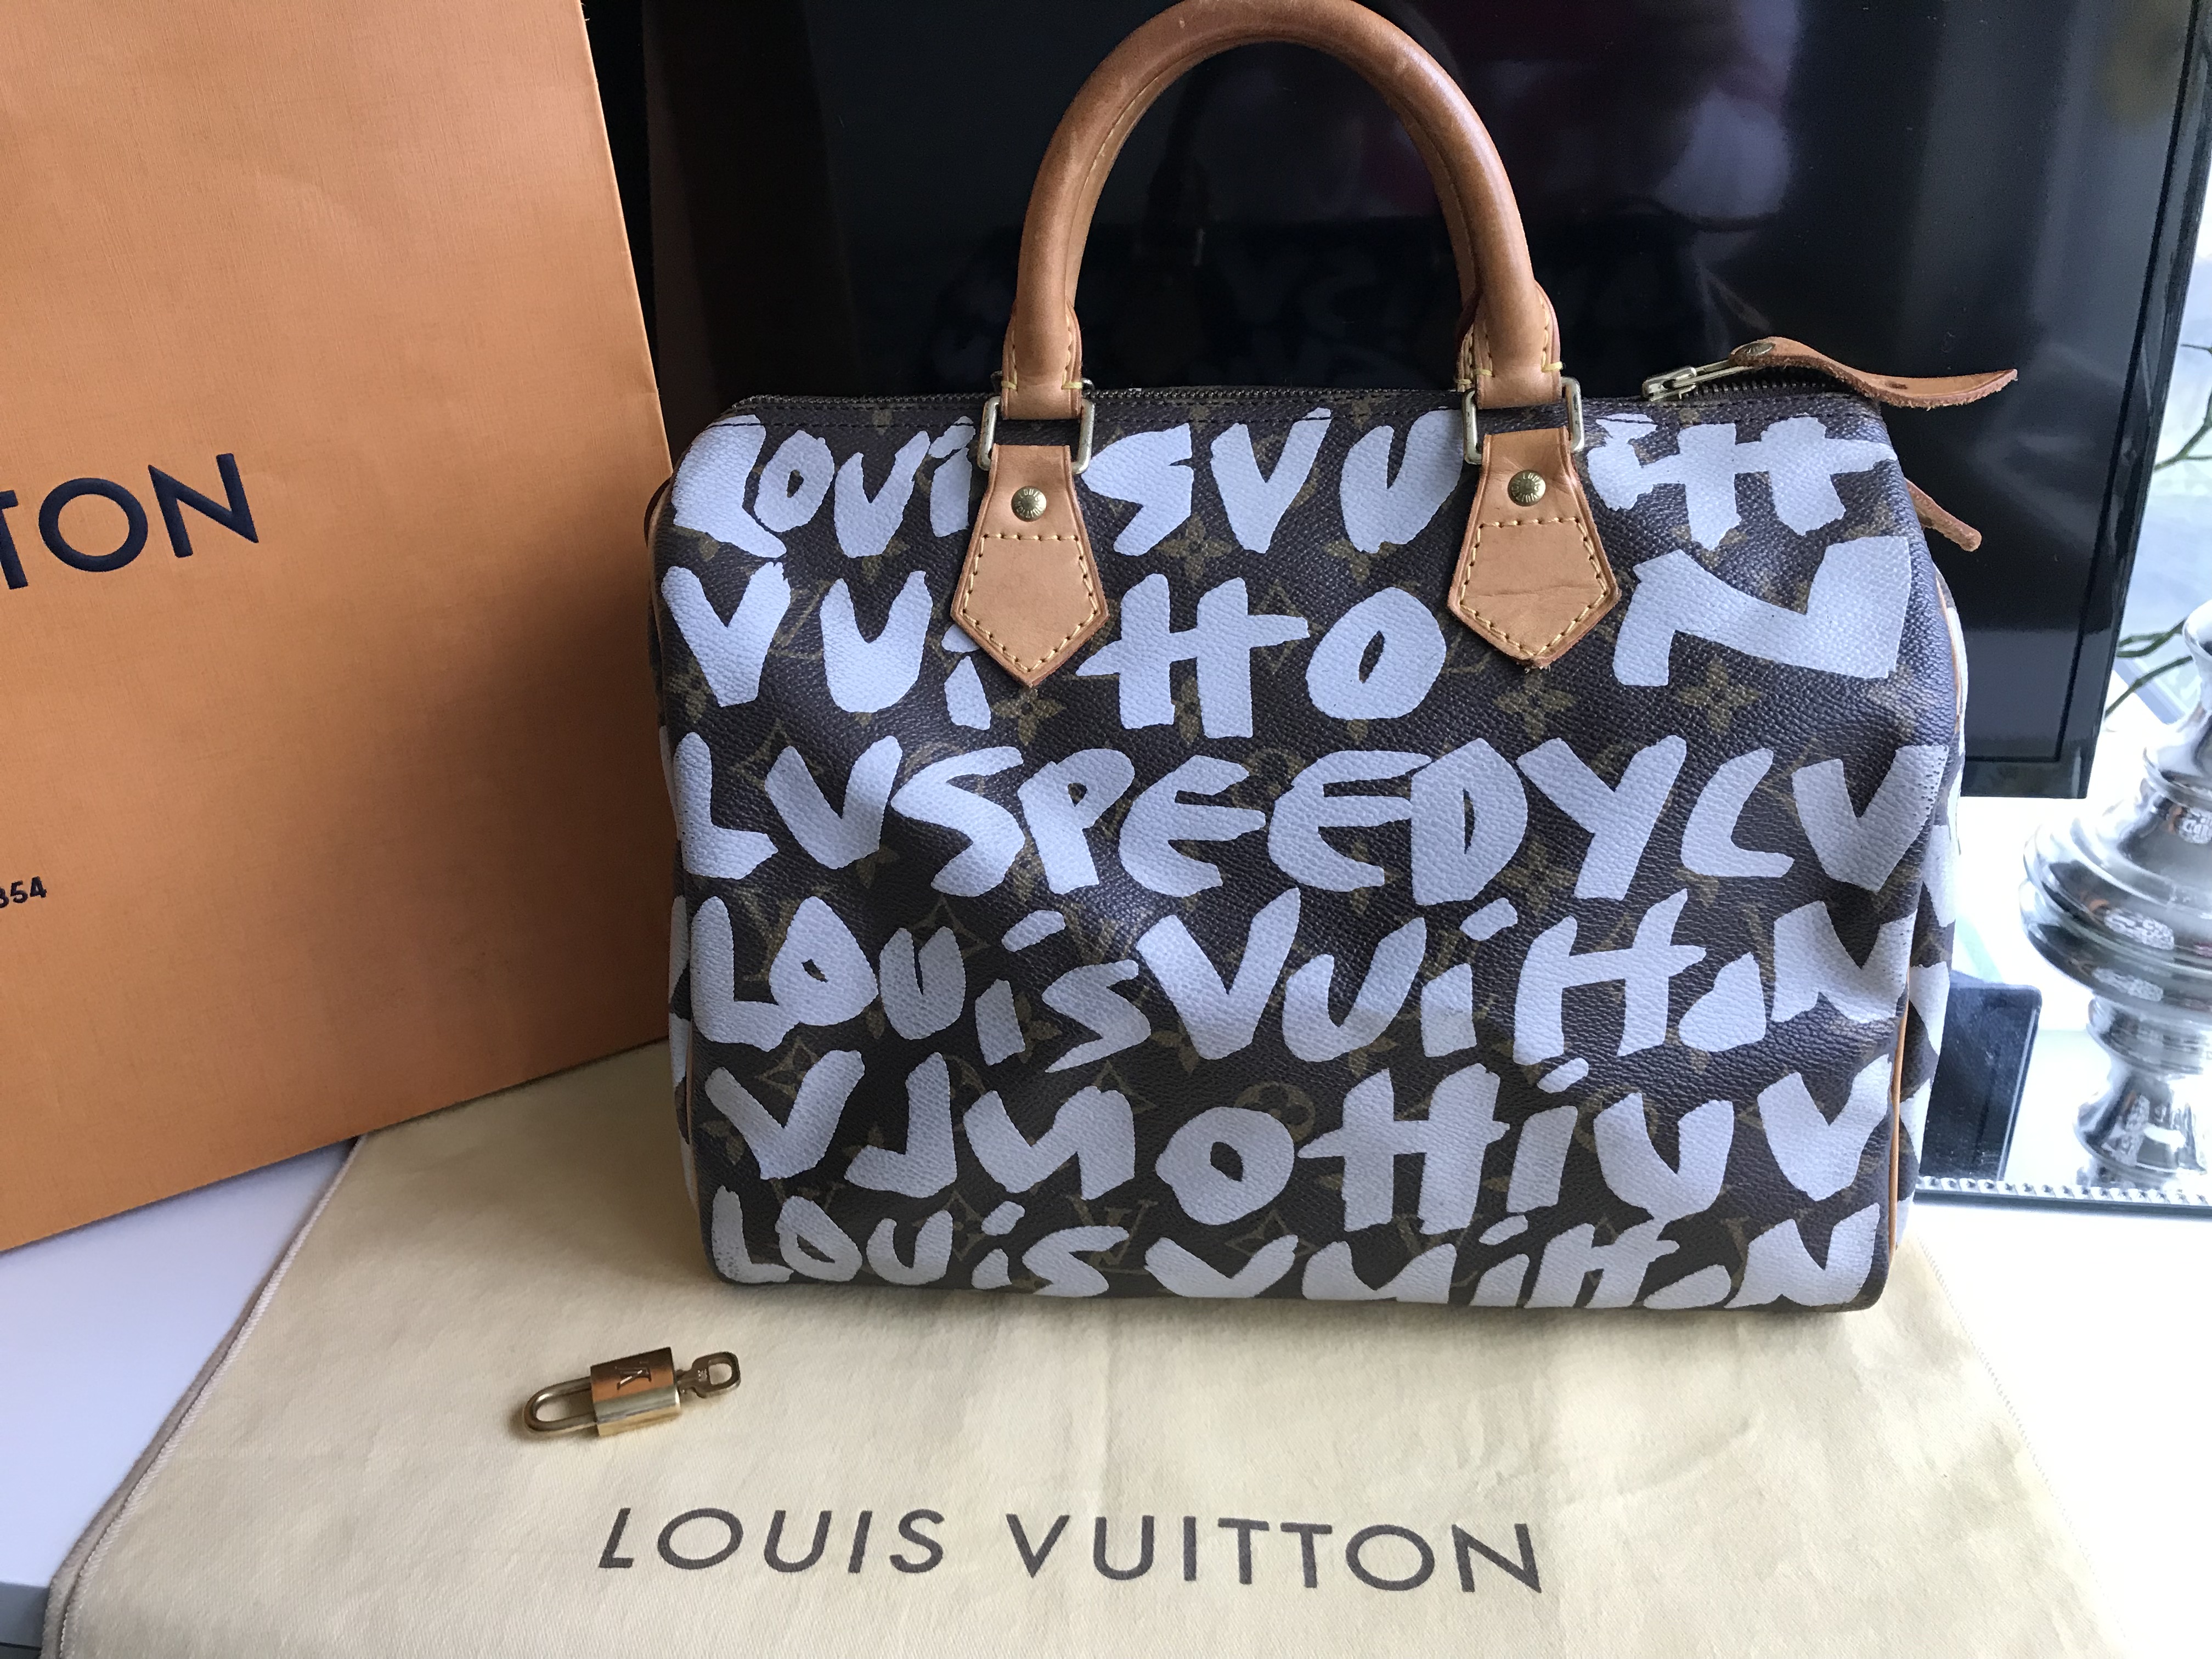 Another Classic Stephen Sprouse For Louis Vuitton Bag